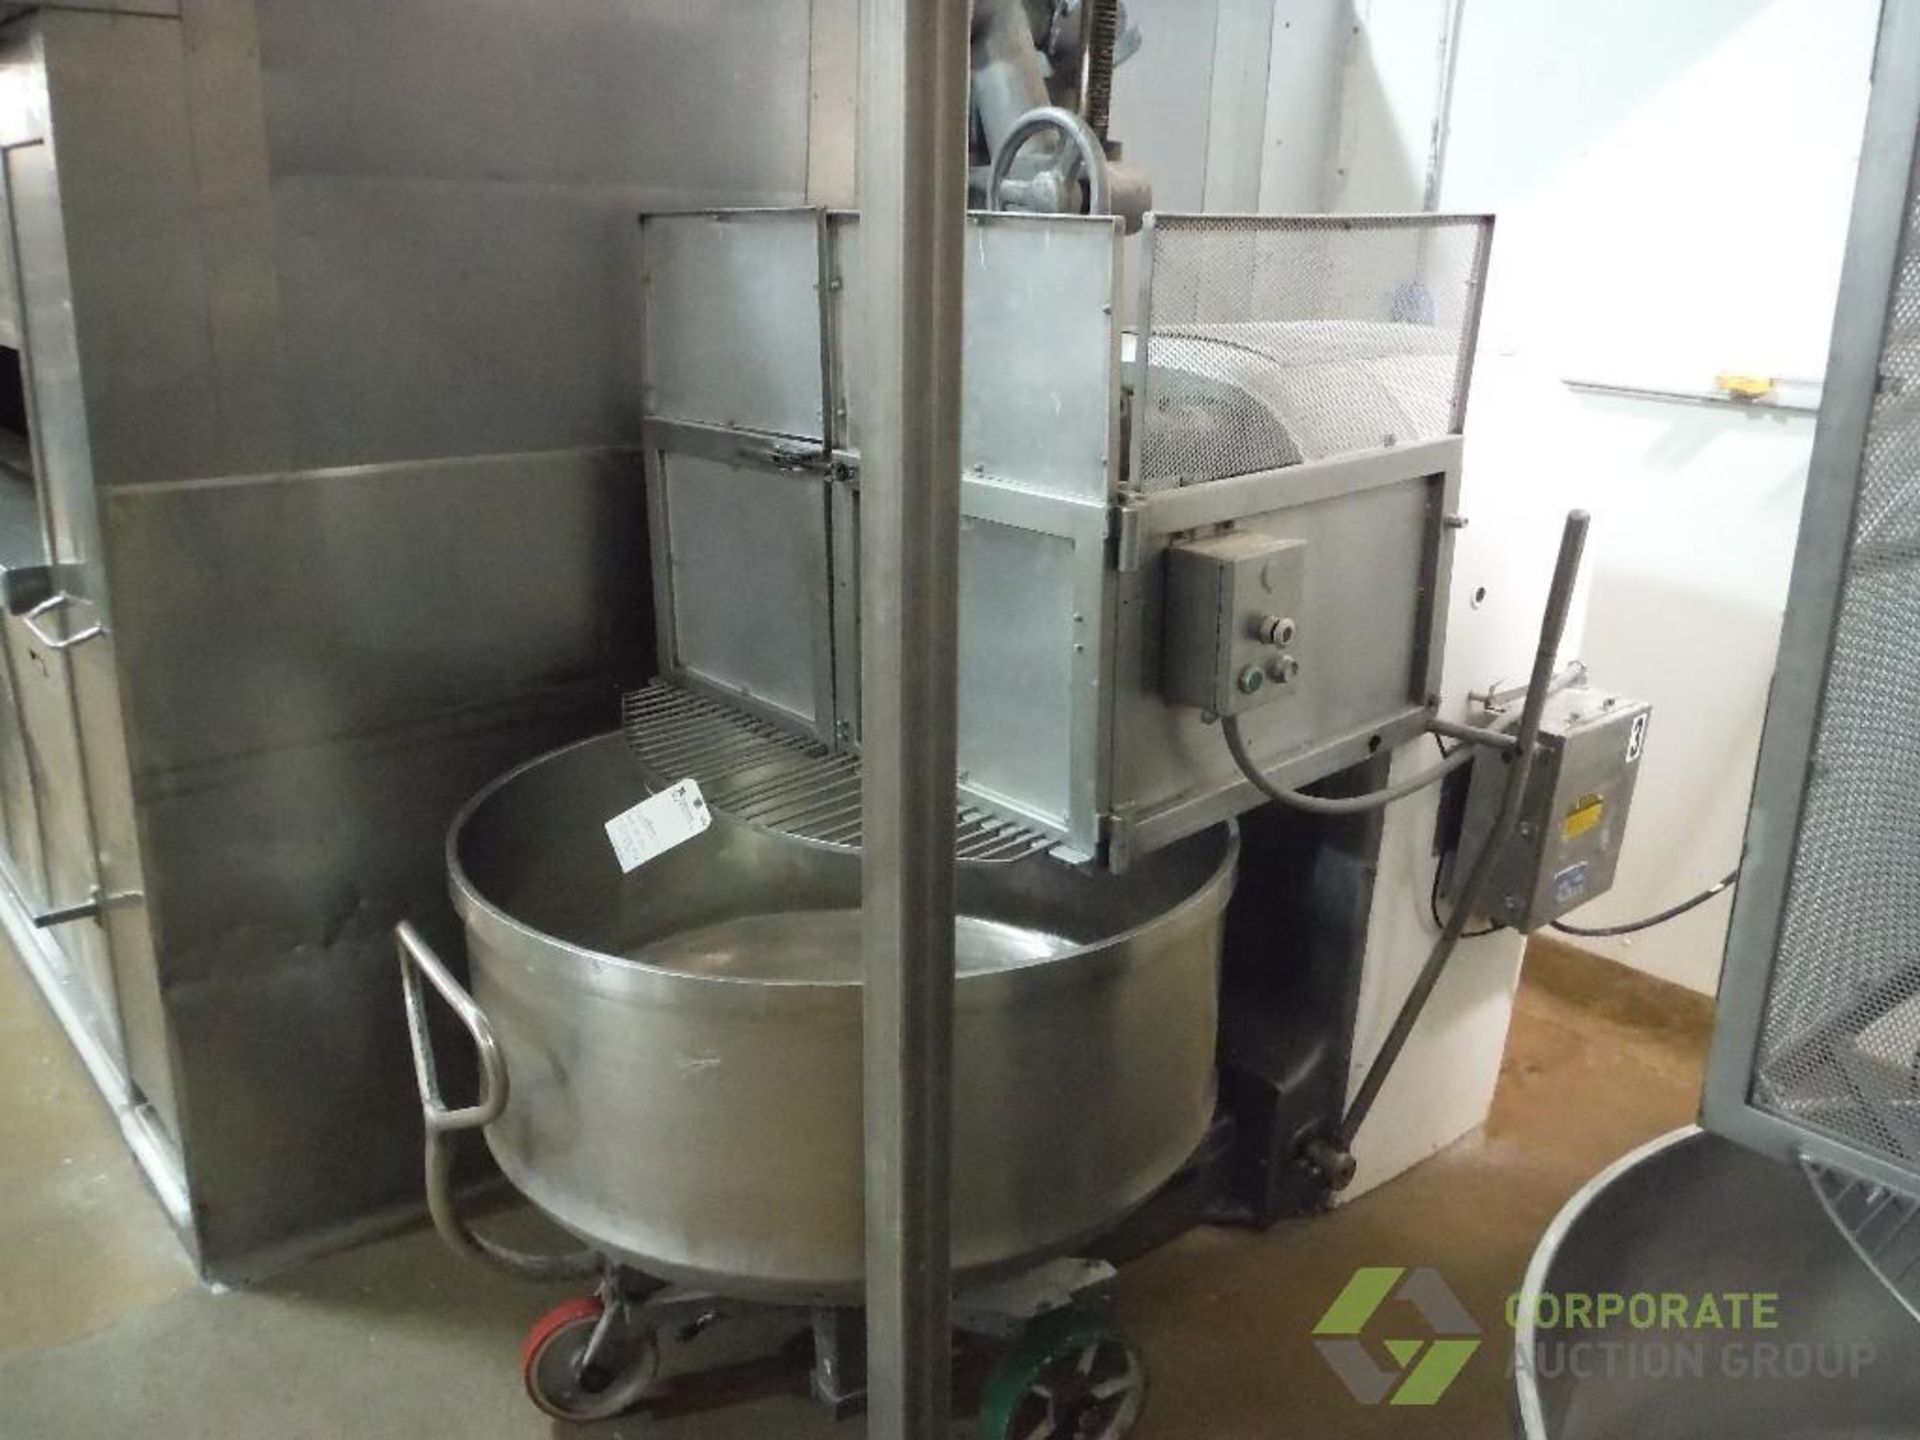 Colborne double arm mixer, Model DM530, SN 206-90, with SS mix bowl and cart, 44 in. dia. - Image 4 of 8